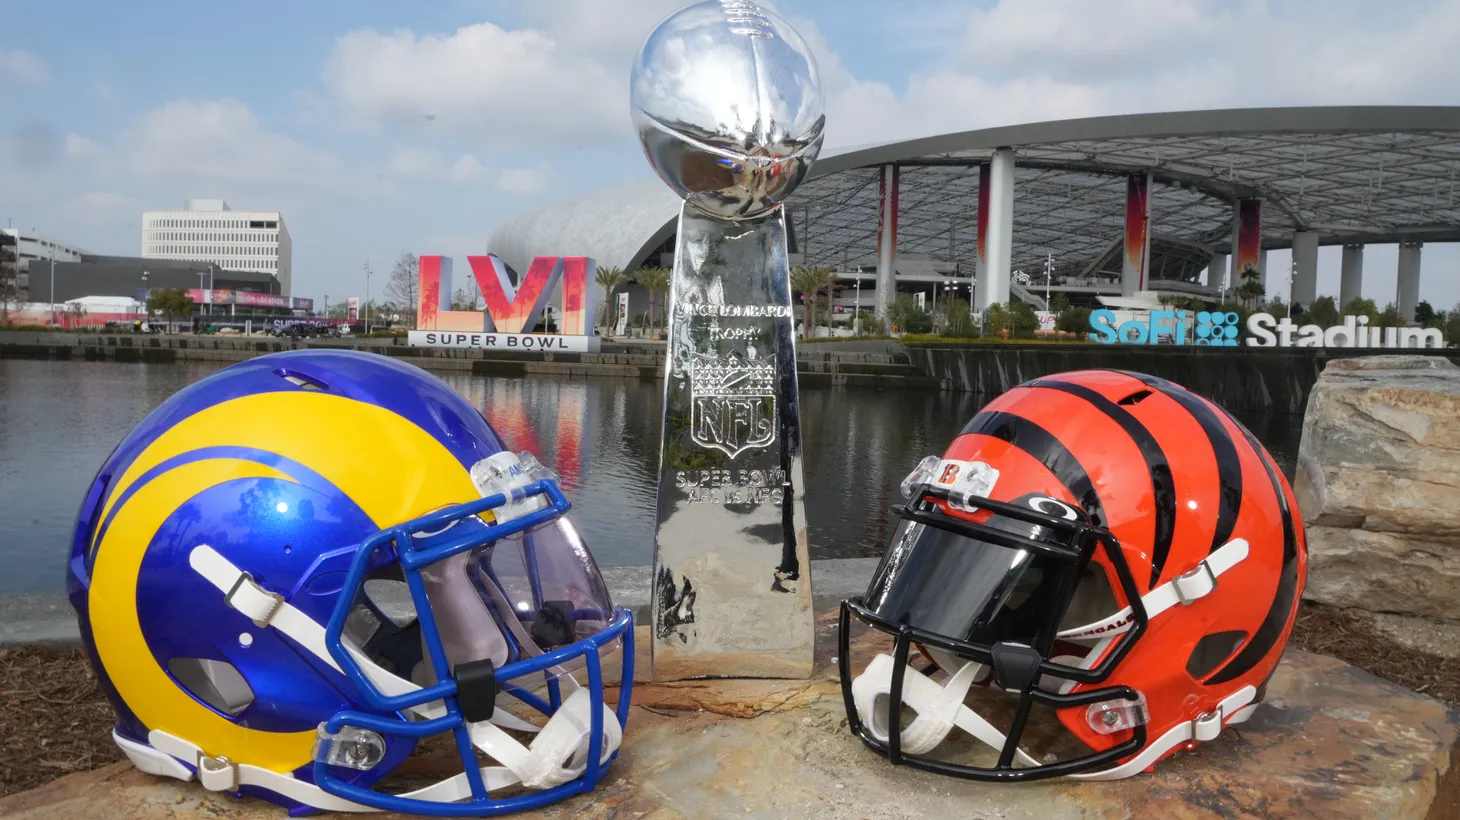 Los Angeles Rams and Cincinnati Bengals helmets are seen with a Vince Lombardi trophy at SoFi Stadium. The Rams and Bengals will play in Super Bowl LVI on Feb. 13, 2022.